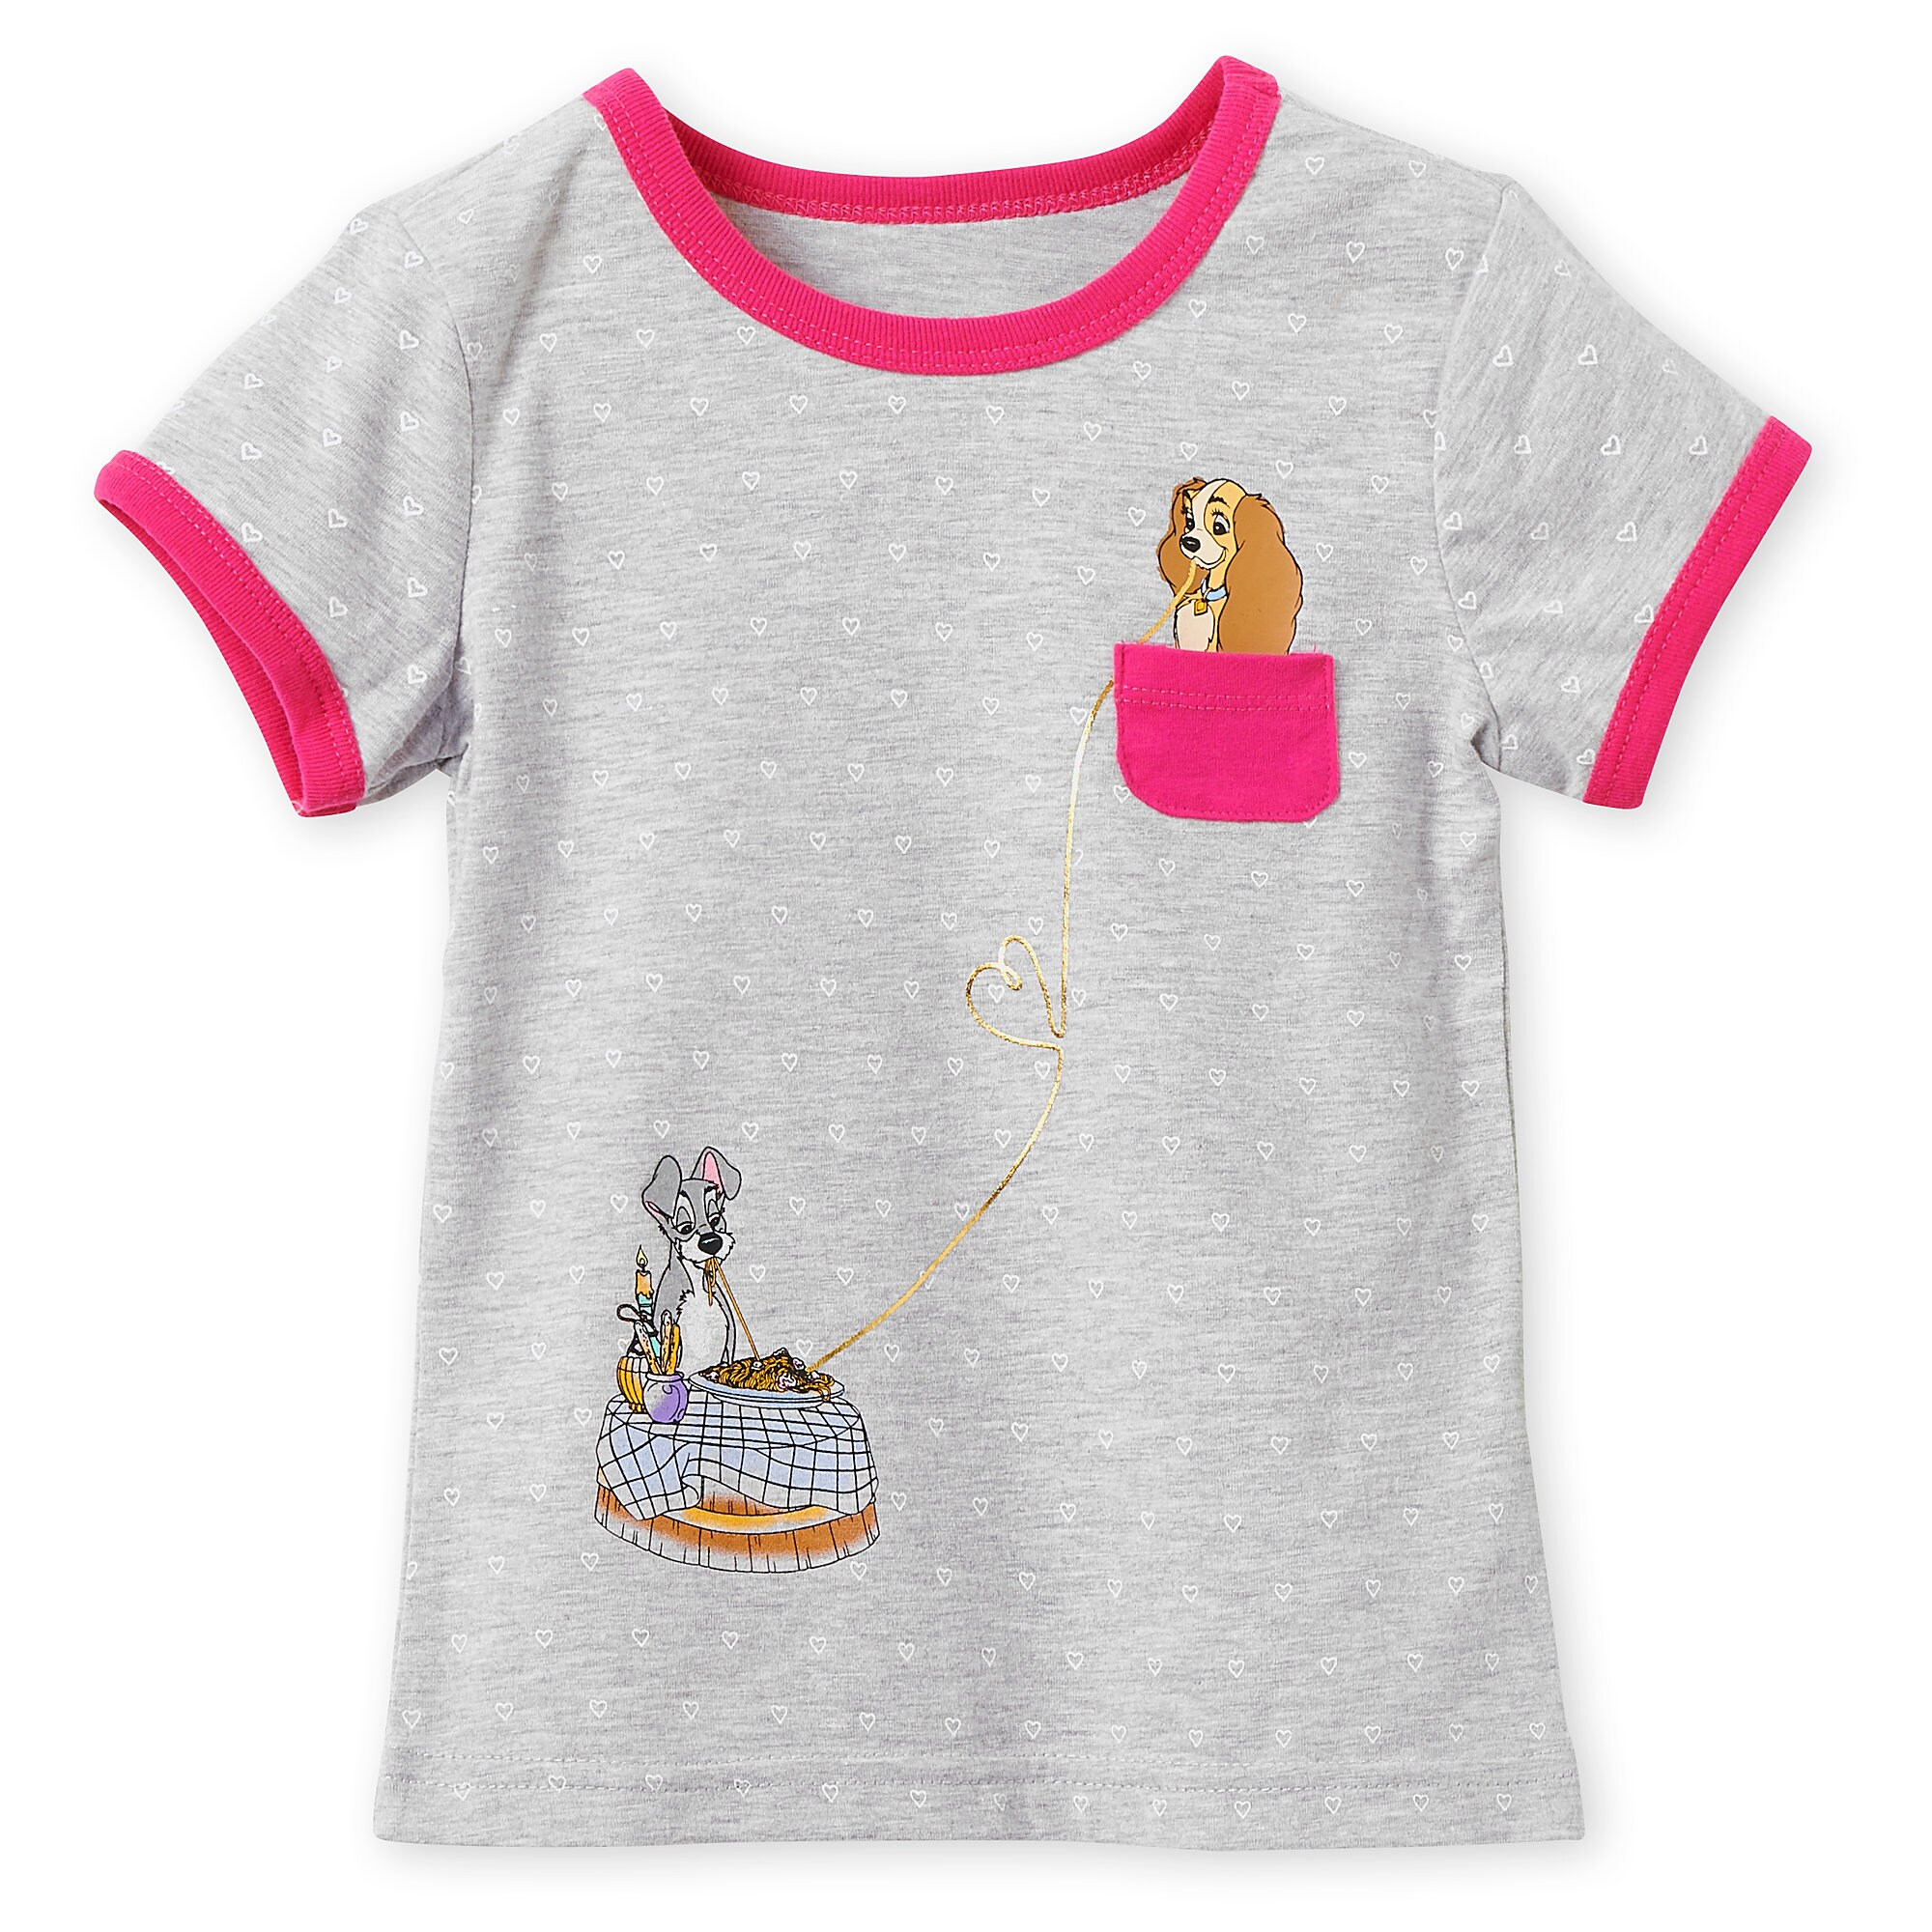 Lady and the Tramp Ringer Tee for Girls